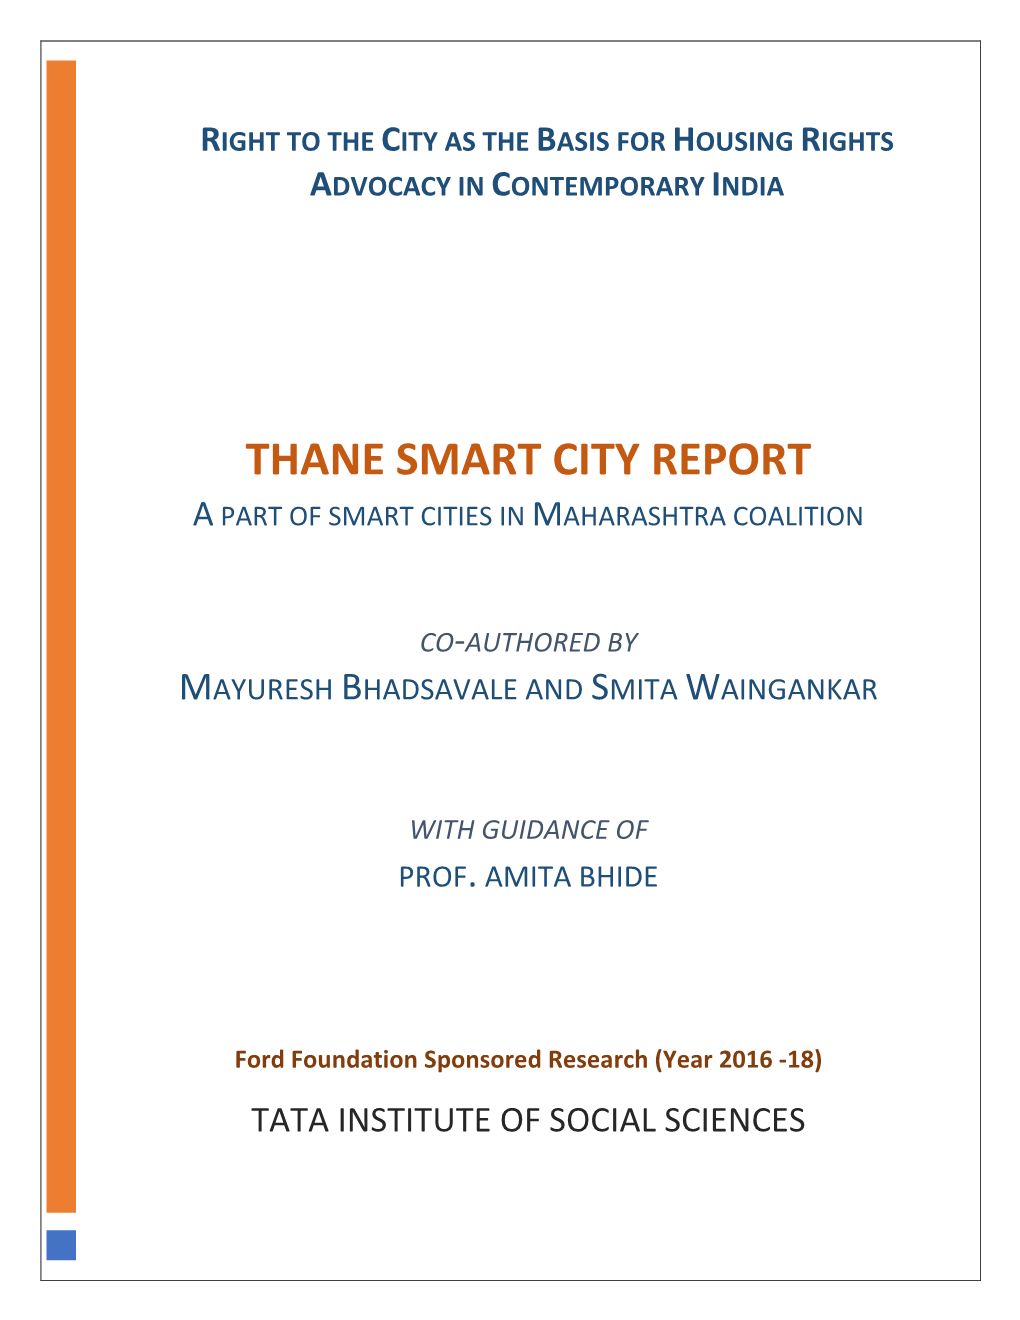 Thane Smart City Report a Part of Smart Cities in Maharashtra Coalition